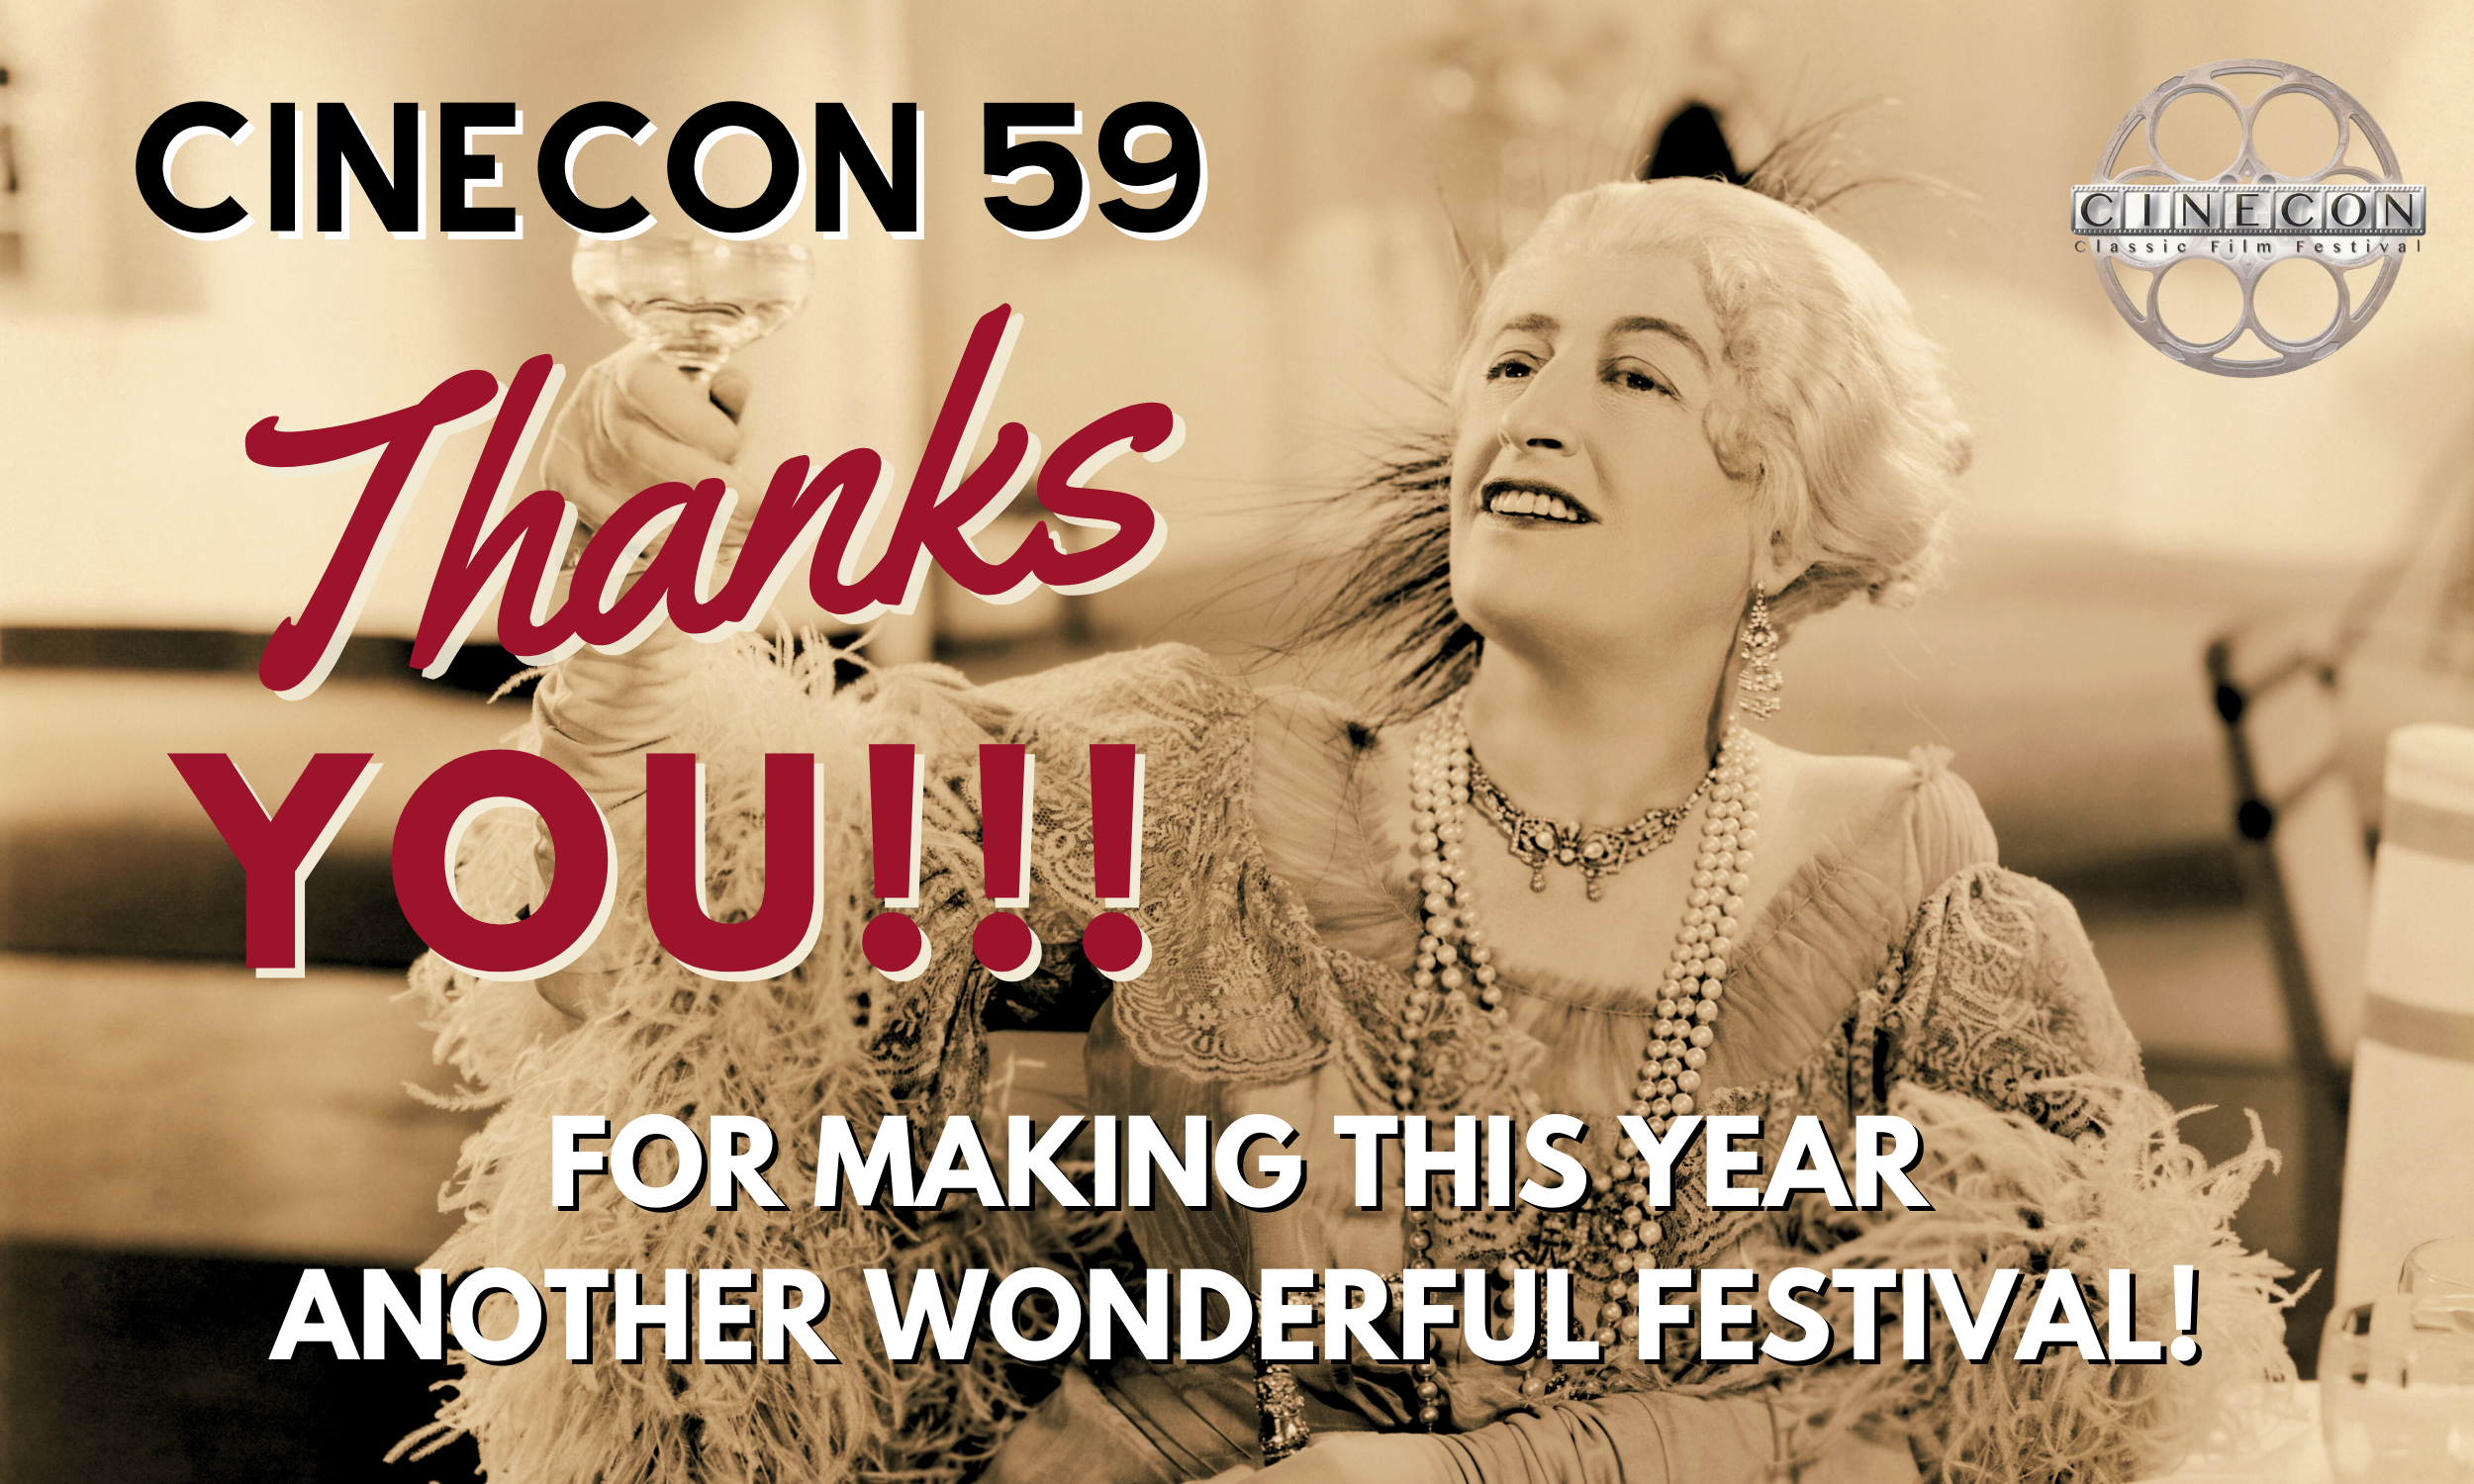 Cinecon 59 thanks everyone for their support